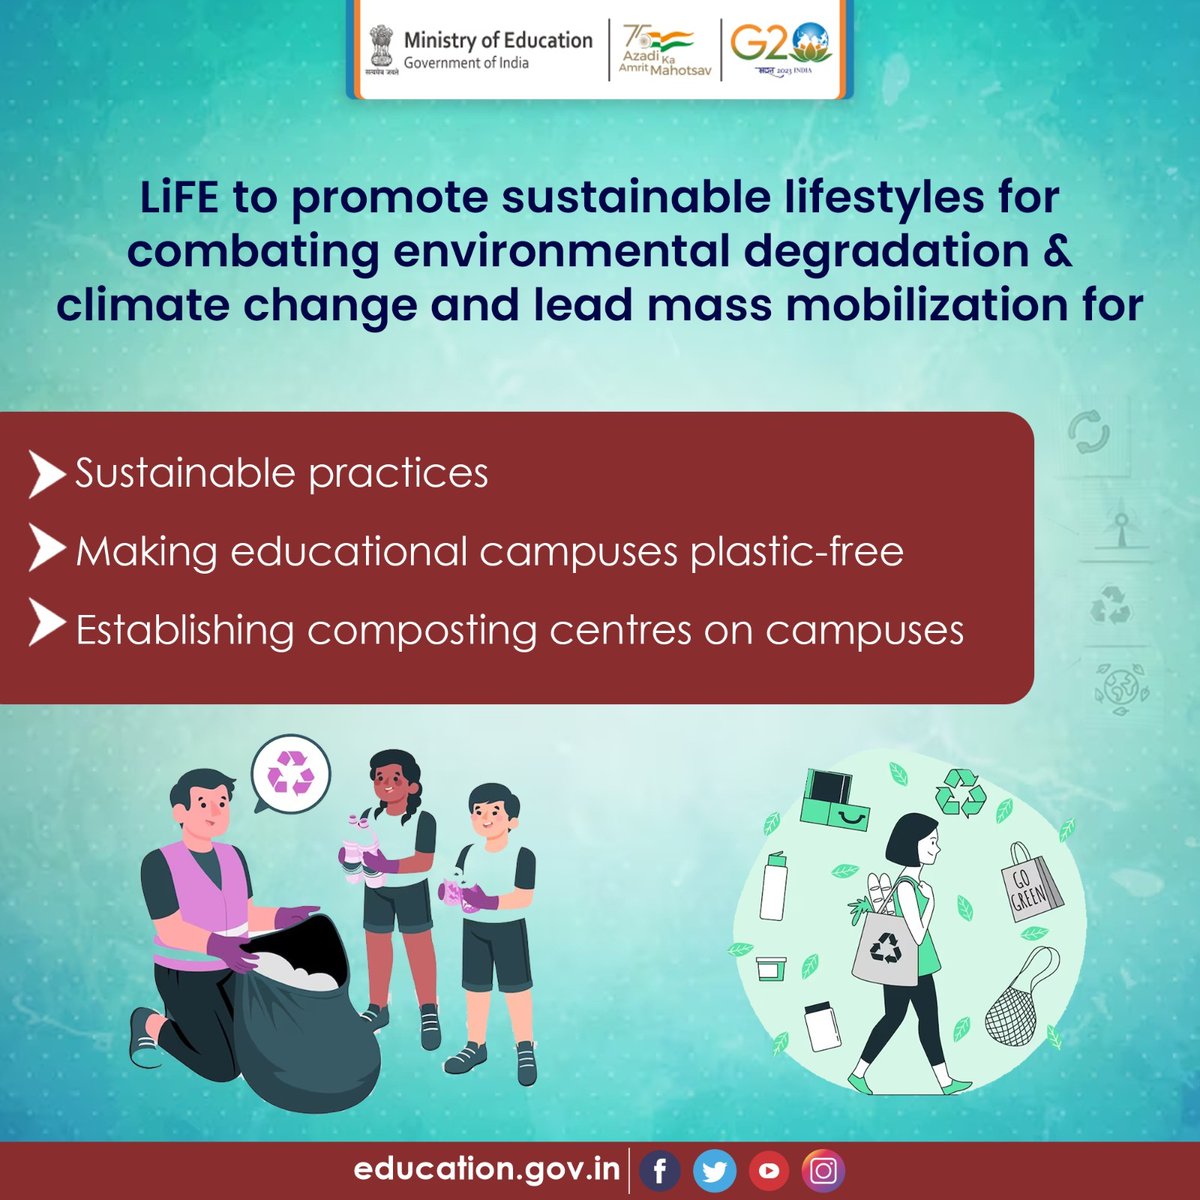 #G20 #EdWG: The 'Lifestyle for the Environment' (LiFE) concept, advocated by Hon'ble Prime Minister underscores the vital significance of education in combating climate change. It emphasizes that 'Lifestyles' play a pivotal role as catalysts in attaining Sustainable Development…